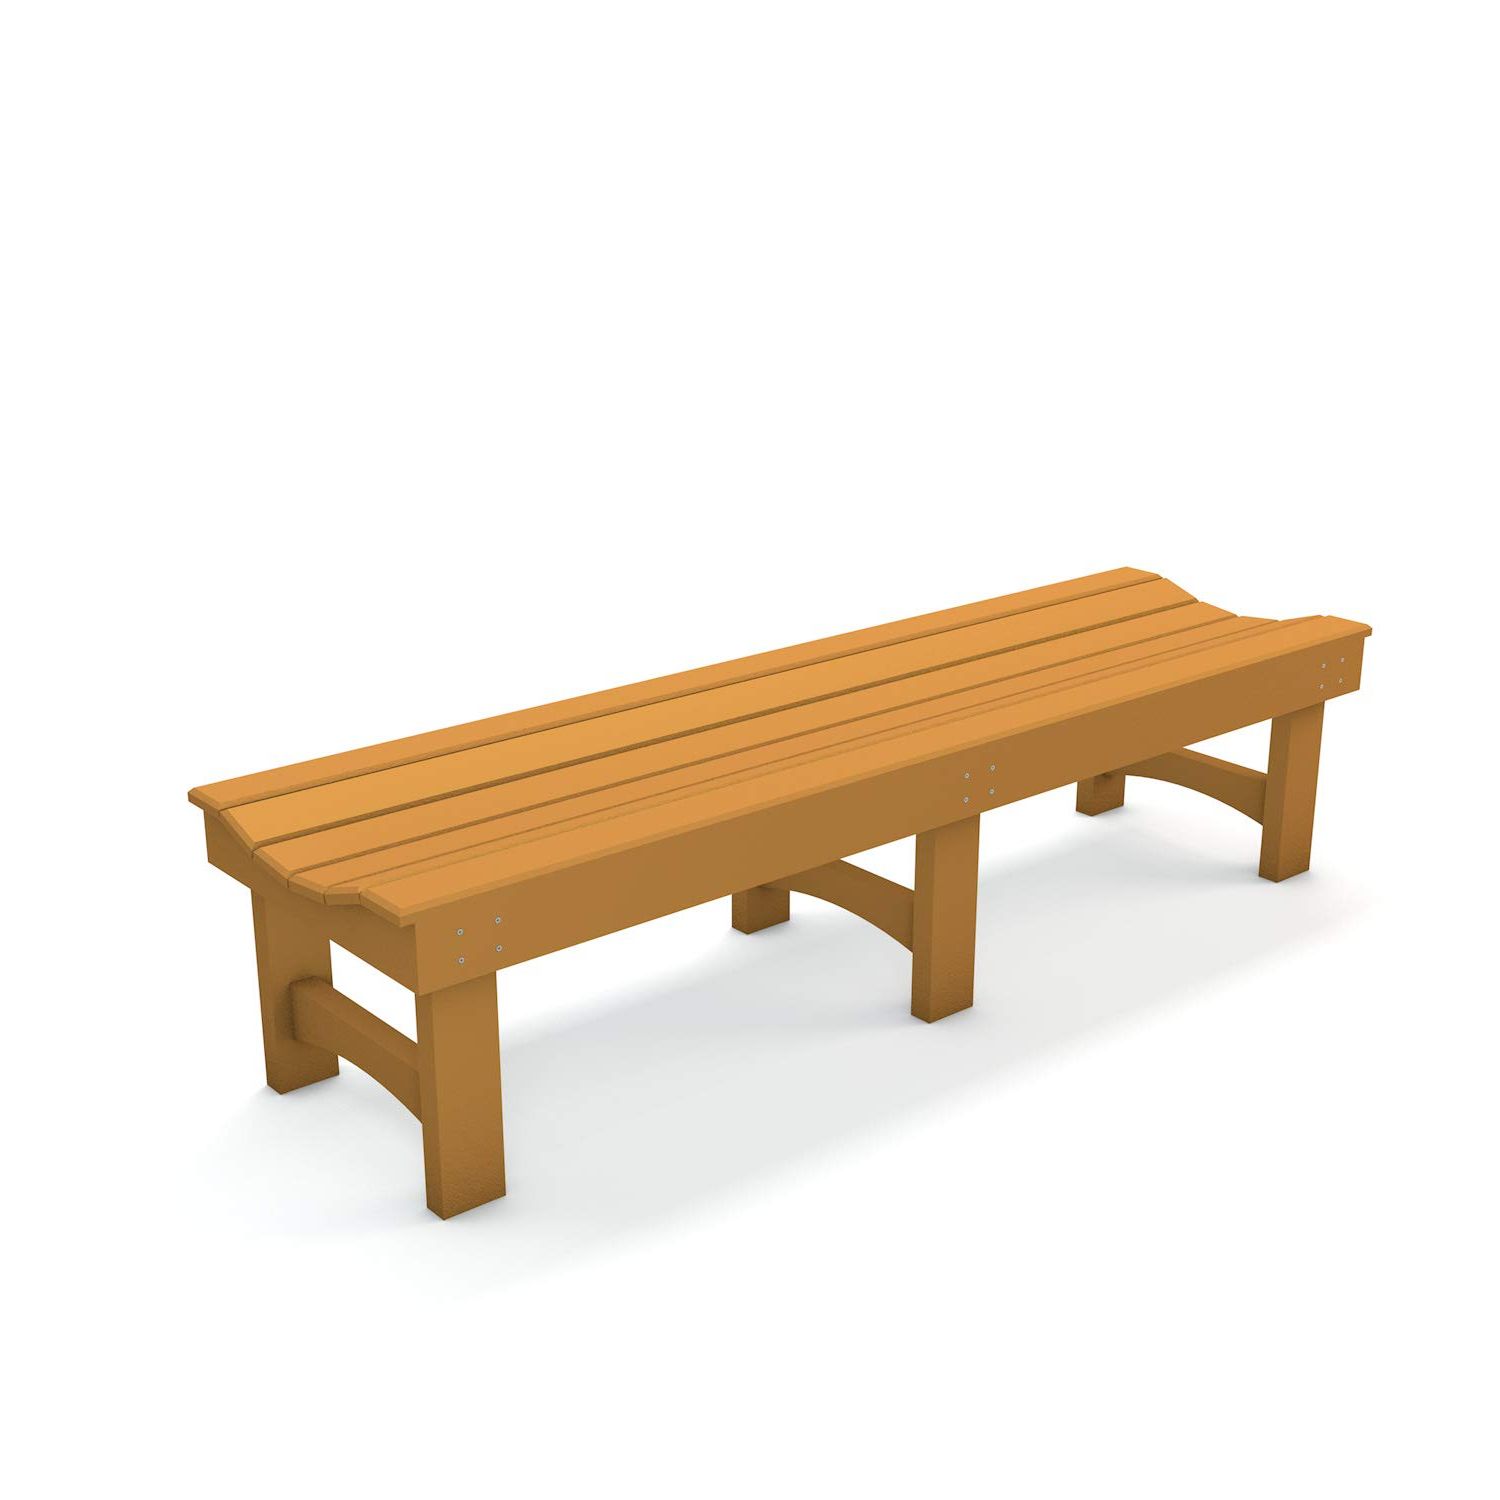 Amazon : Frog Furnishings Garden Bench, 6', Cedar Pertaining To 2020 Cedar Colonial Style Glider Benches (View 2 of 30)